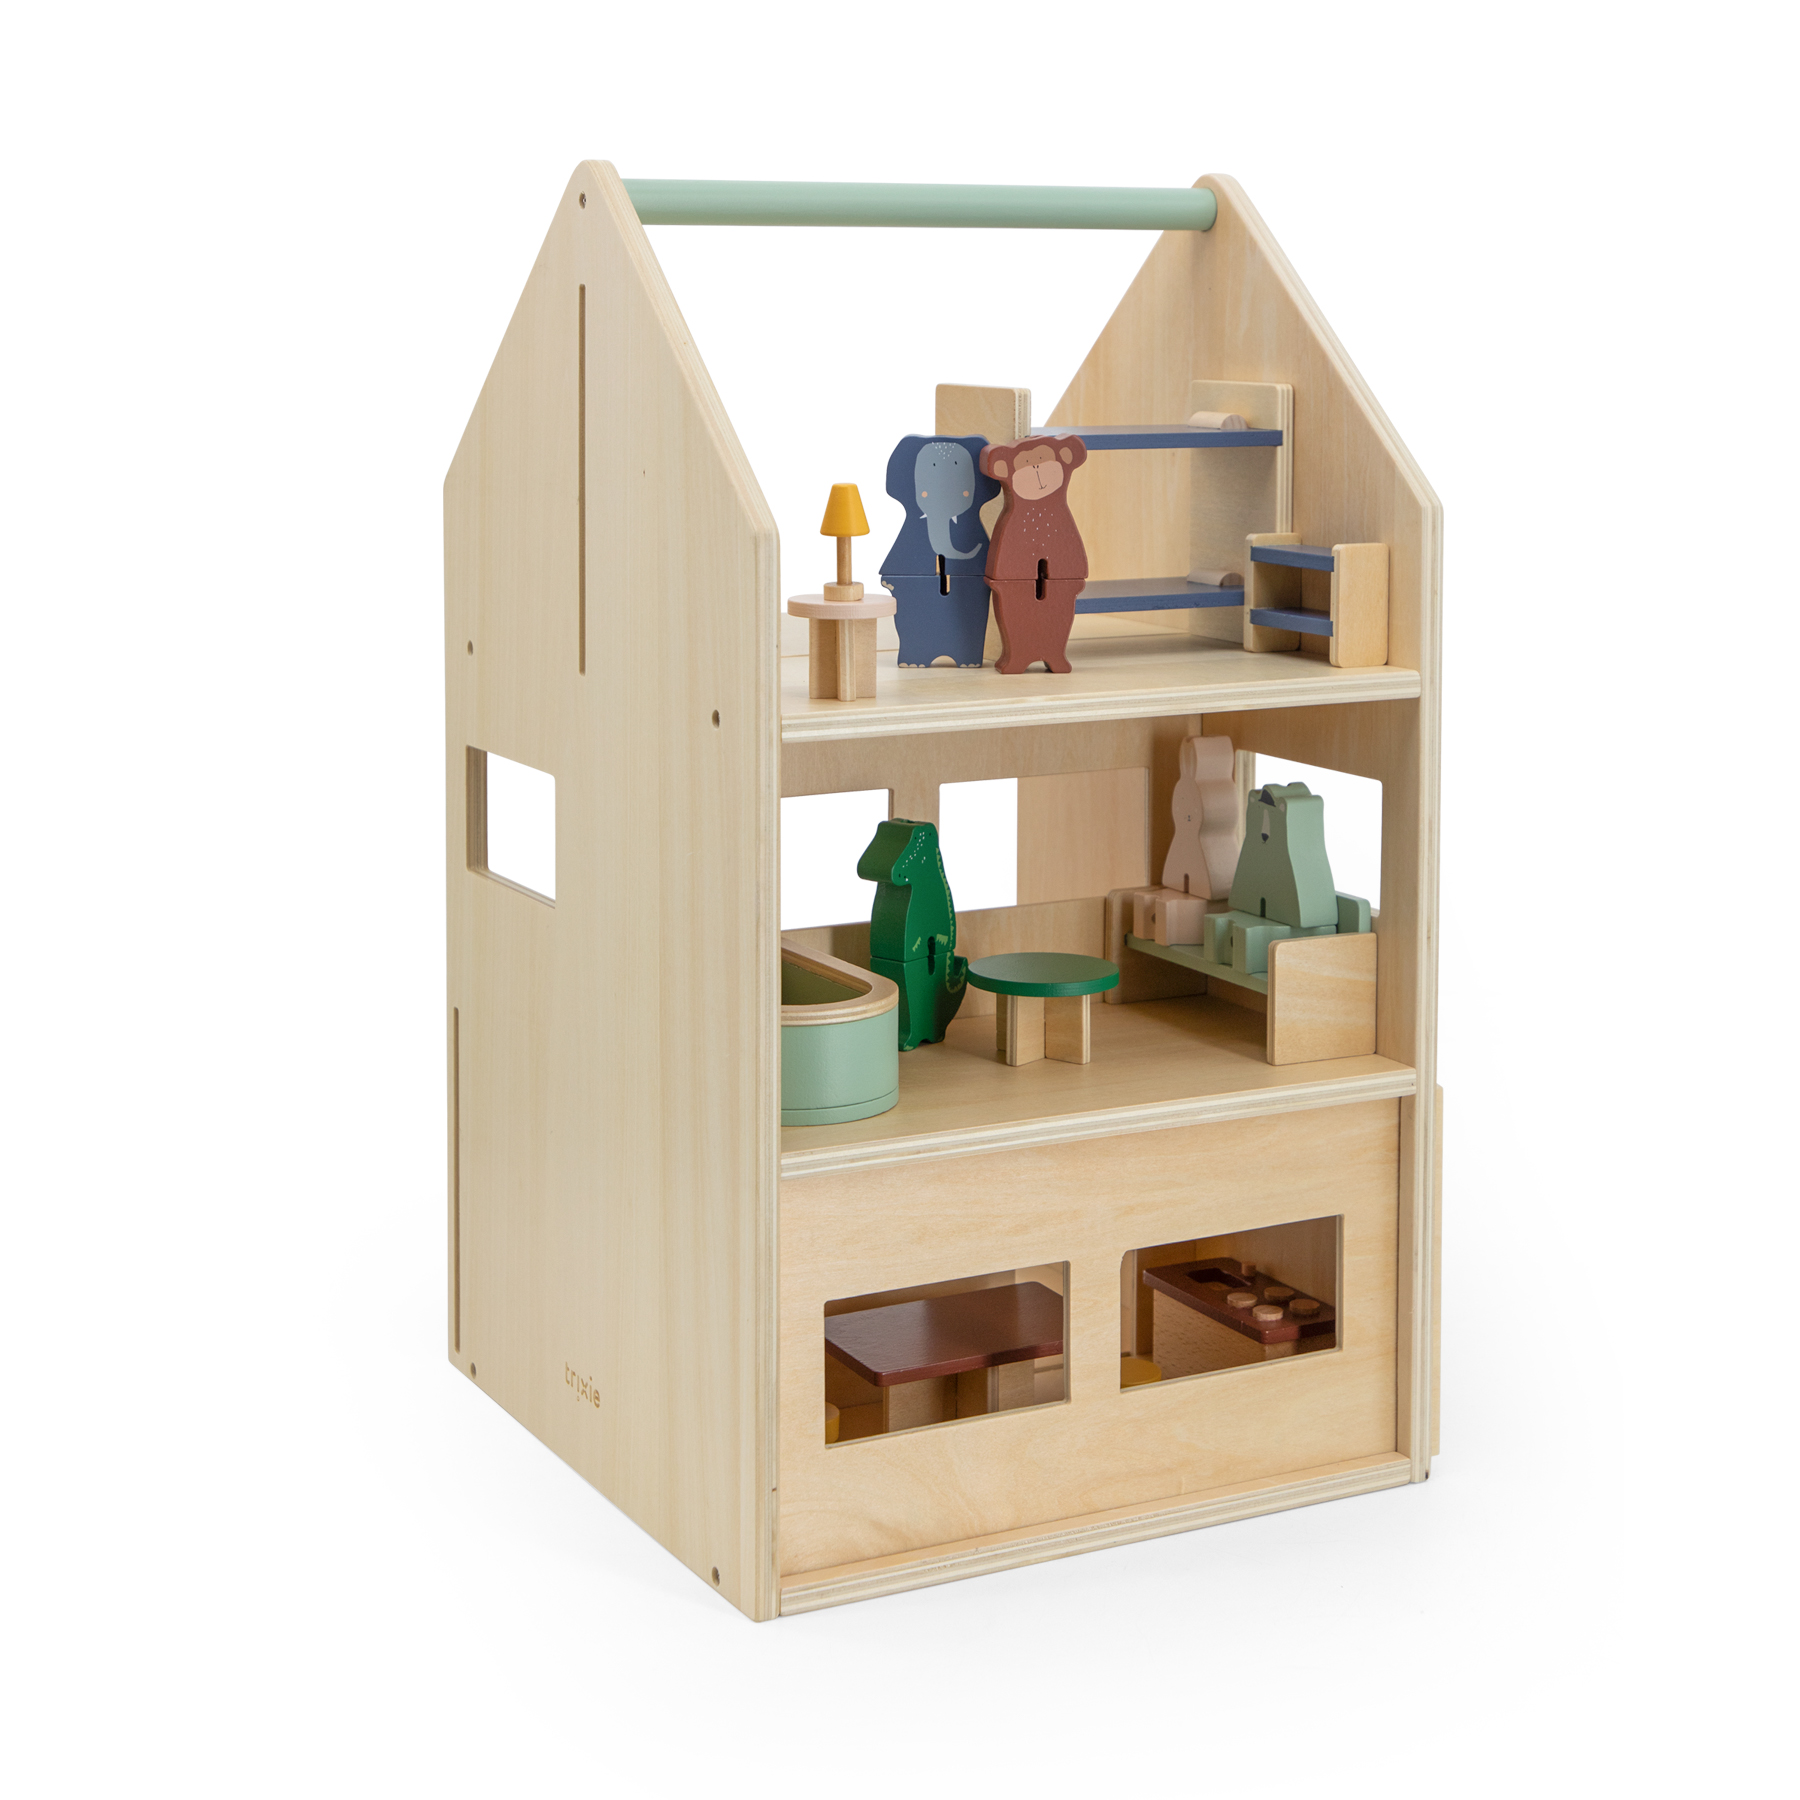 Trixie . Wooden play house with  accessories